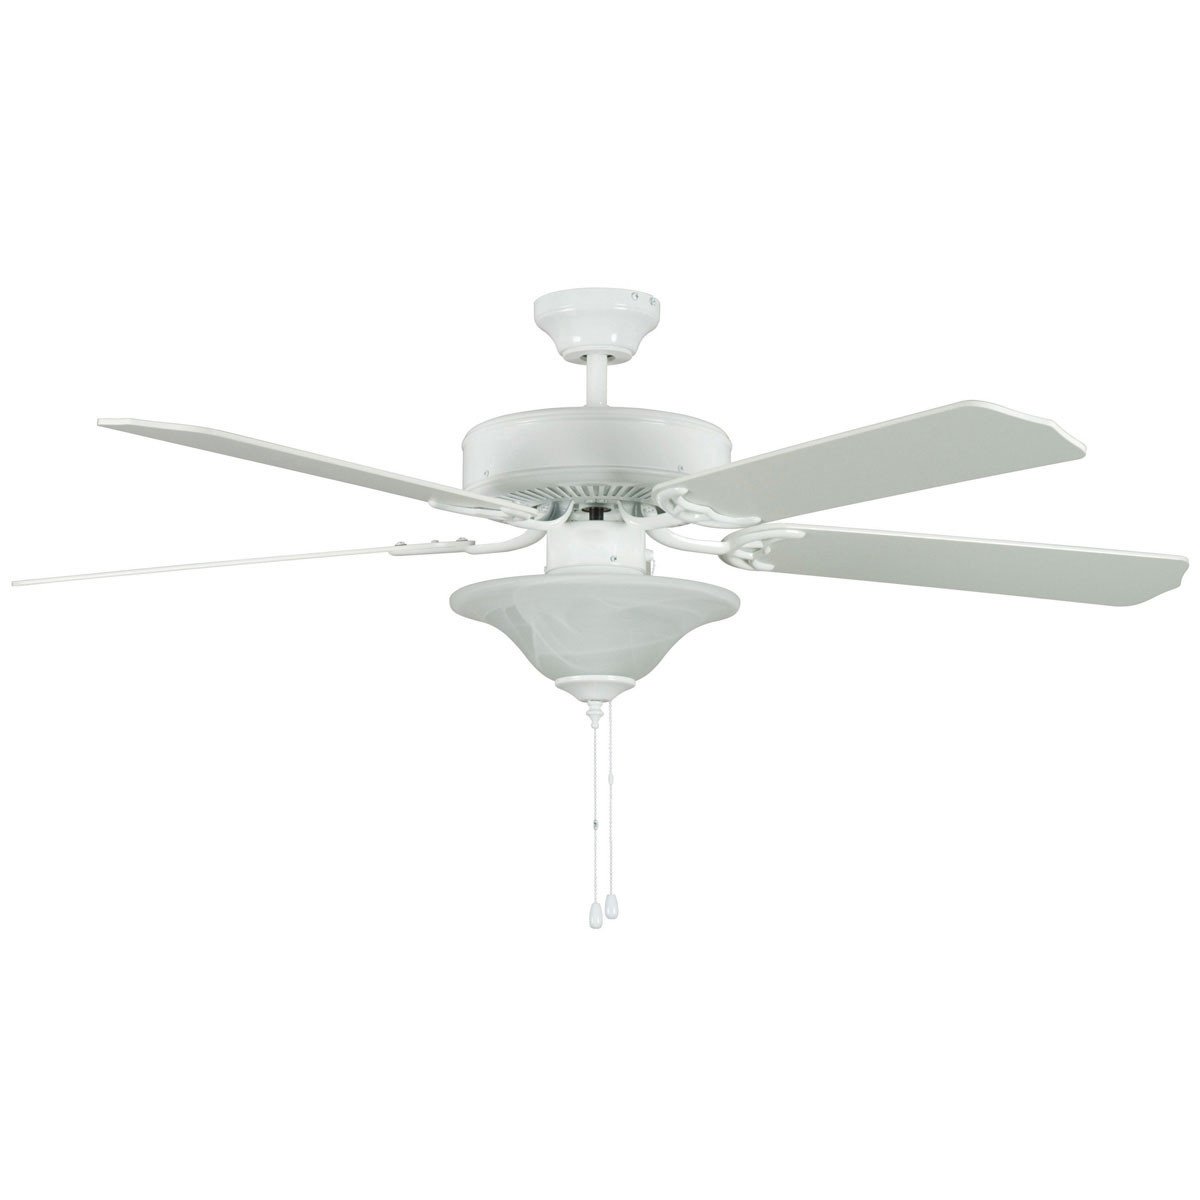 Concord Fans 52" Heritage Square Energy Saver White Ceiling Fan with Light Kit